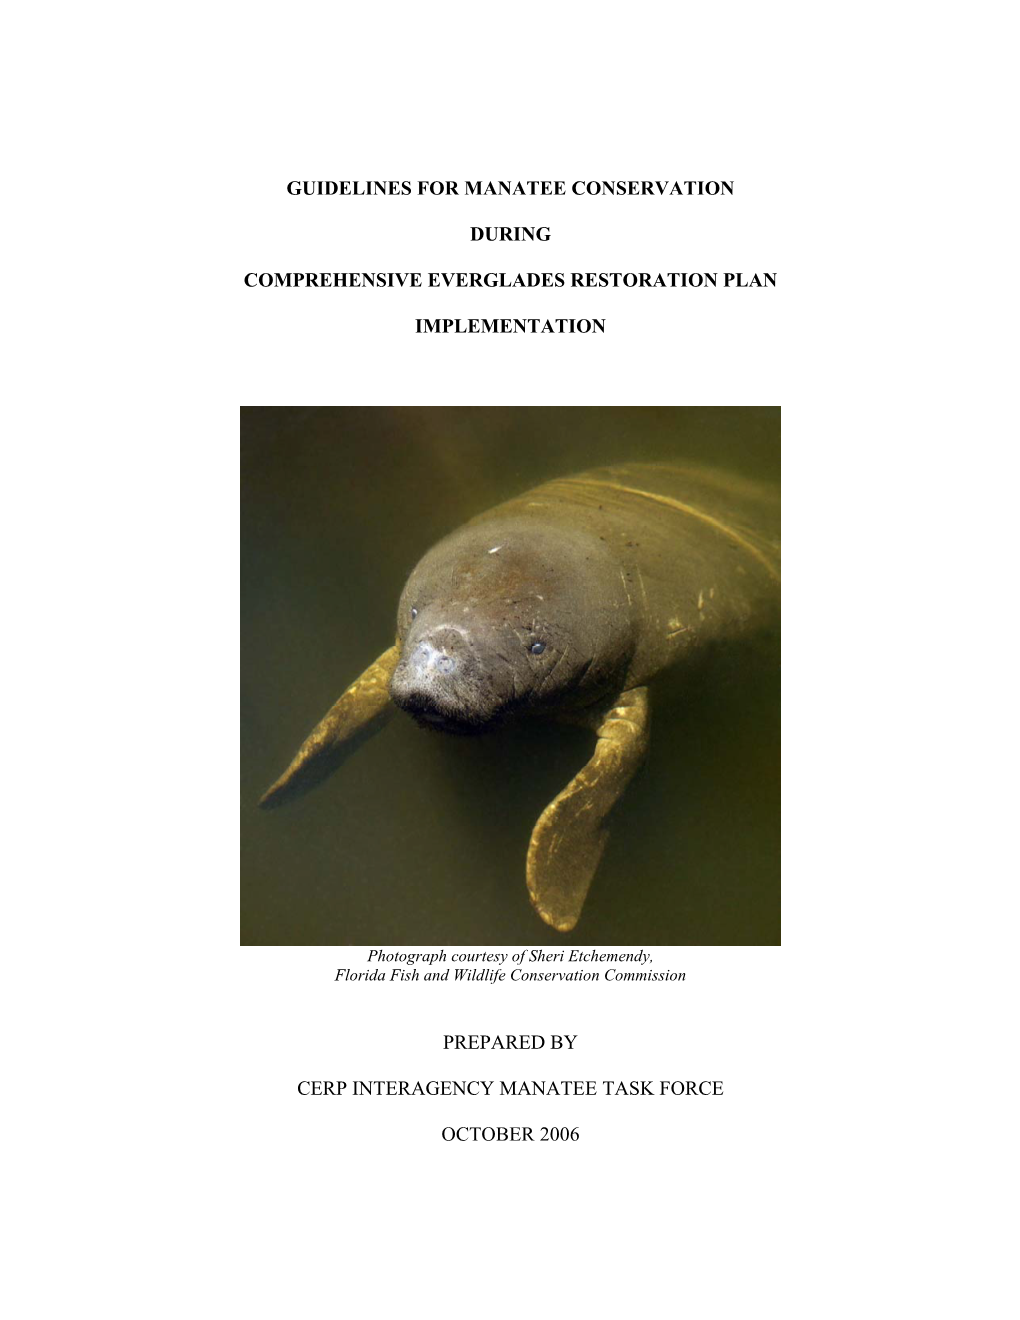 CERP Manatee Guidelines